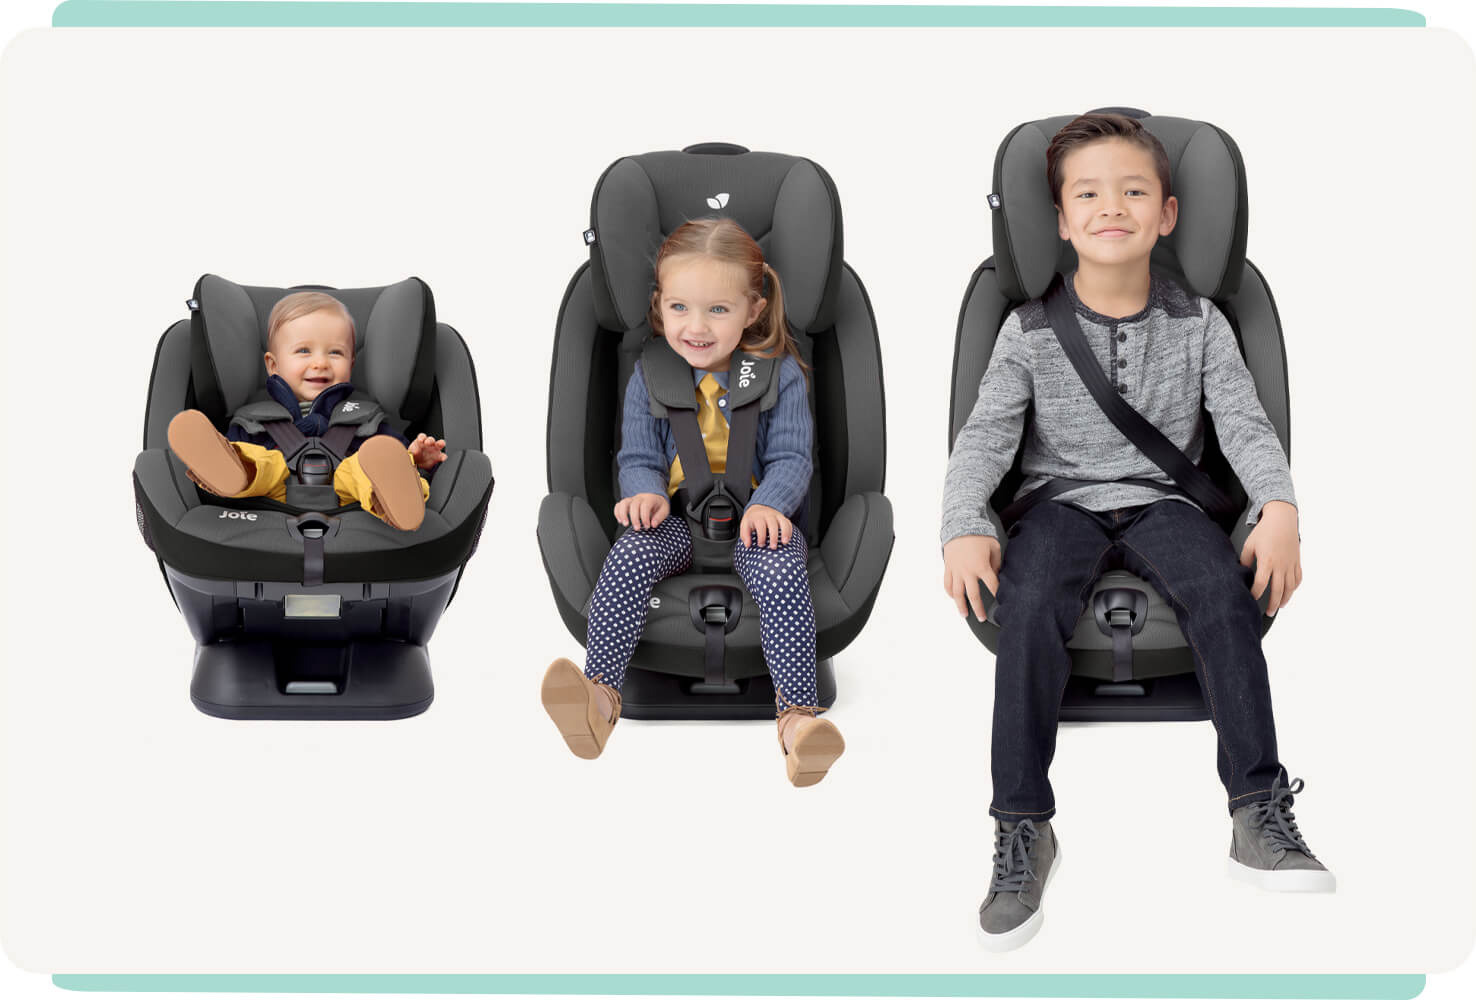 3 black Joie Stages FX car seats side by side with a child sitting in each: from left to right a baby boy, toddler girl, and older boy